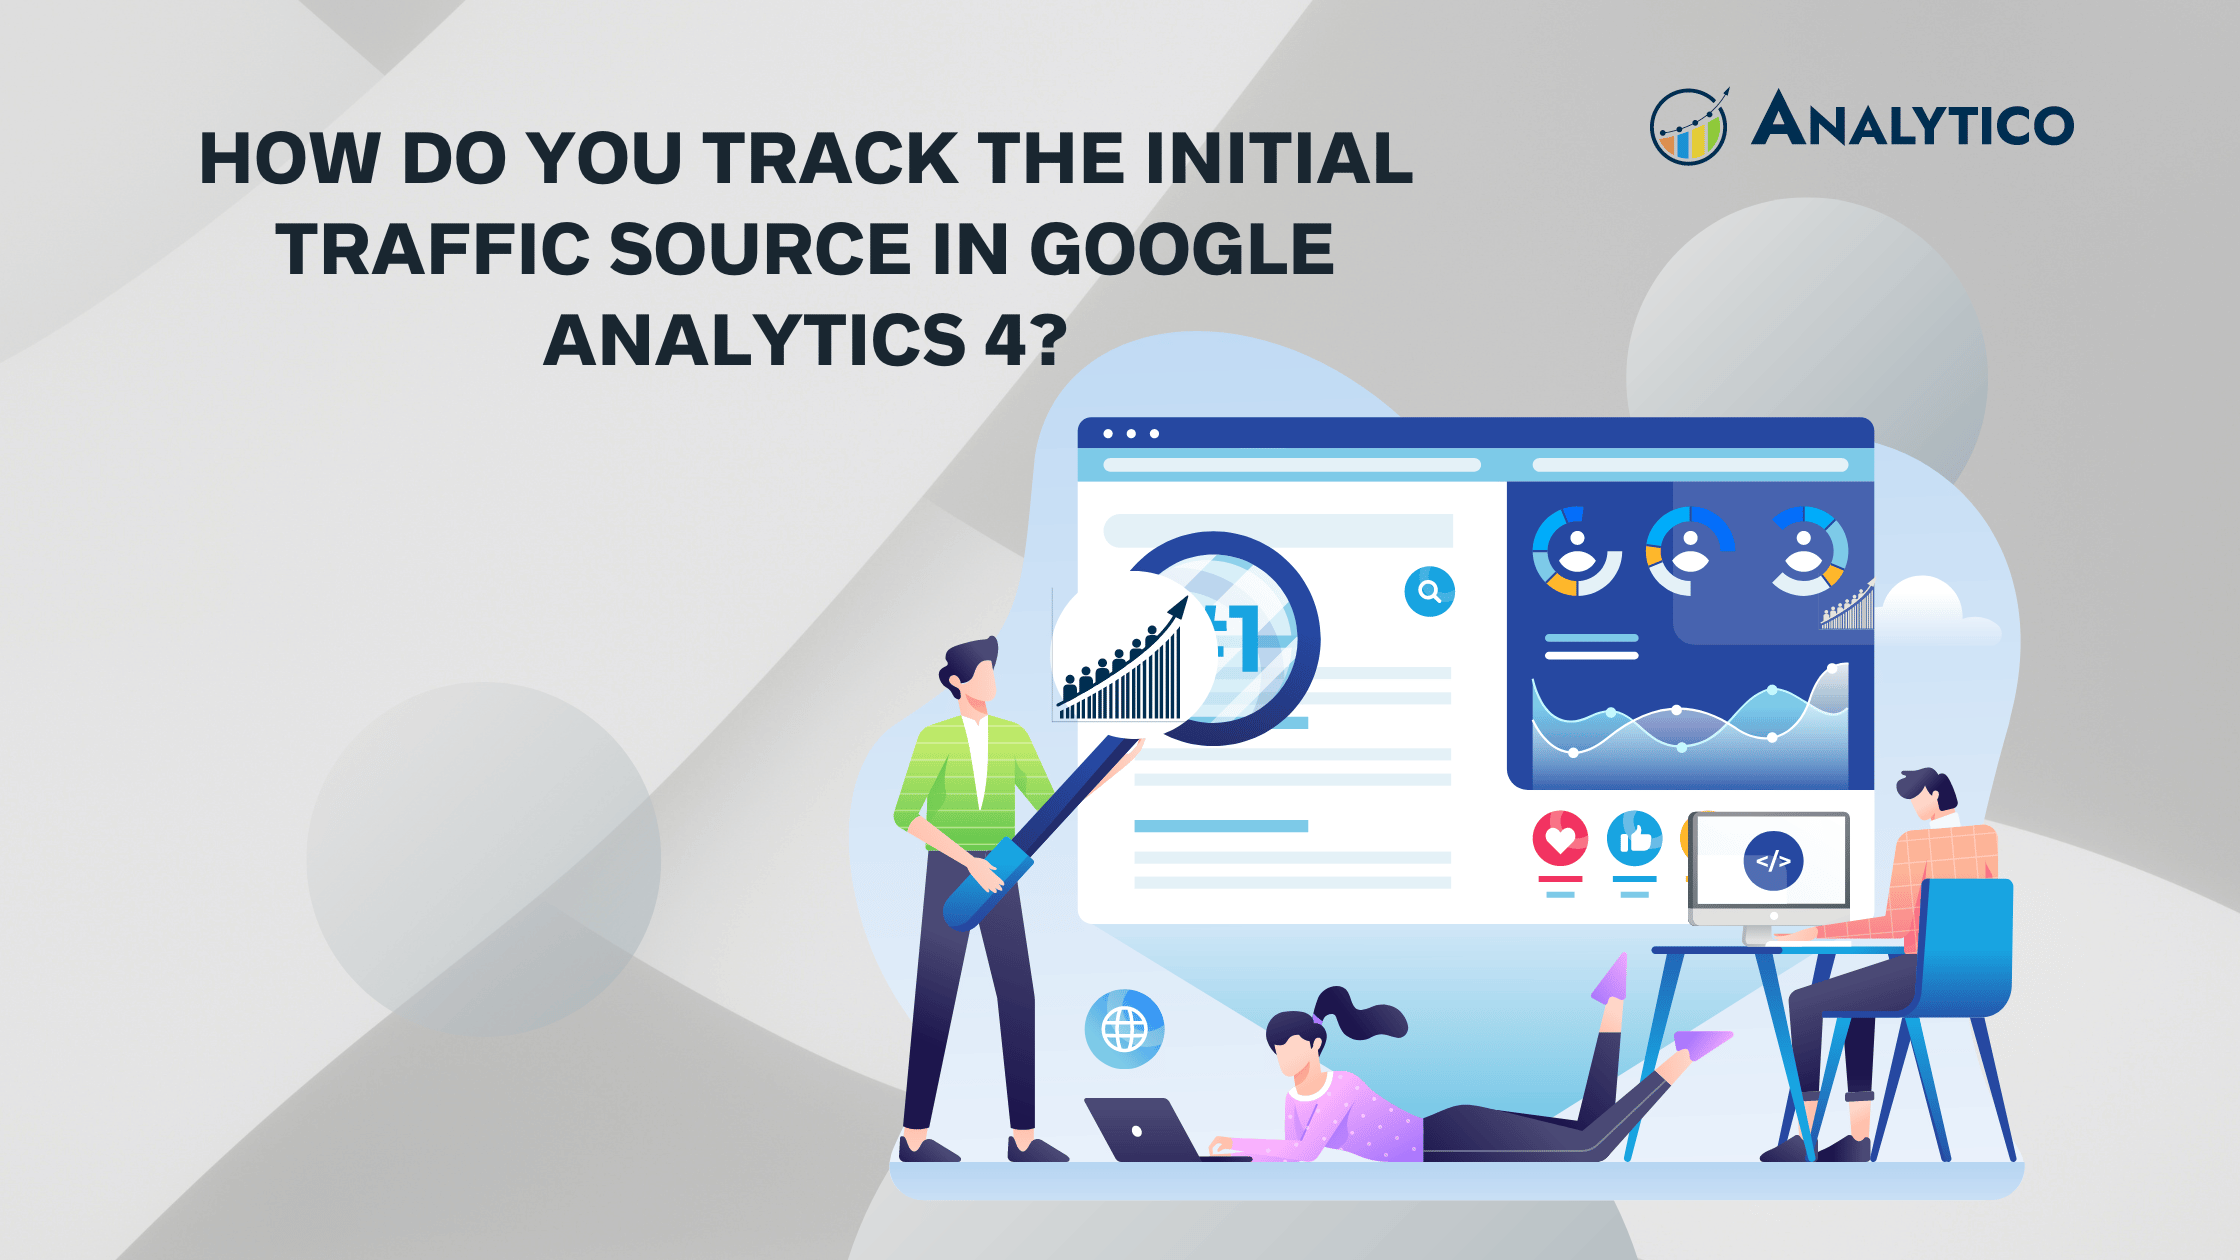 How Do You Track the Initial Traffic Source in Google Analytics 4?